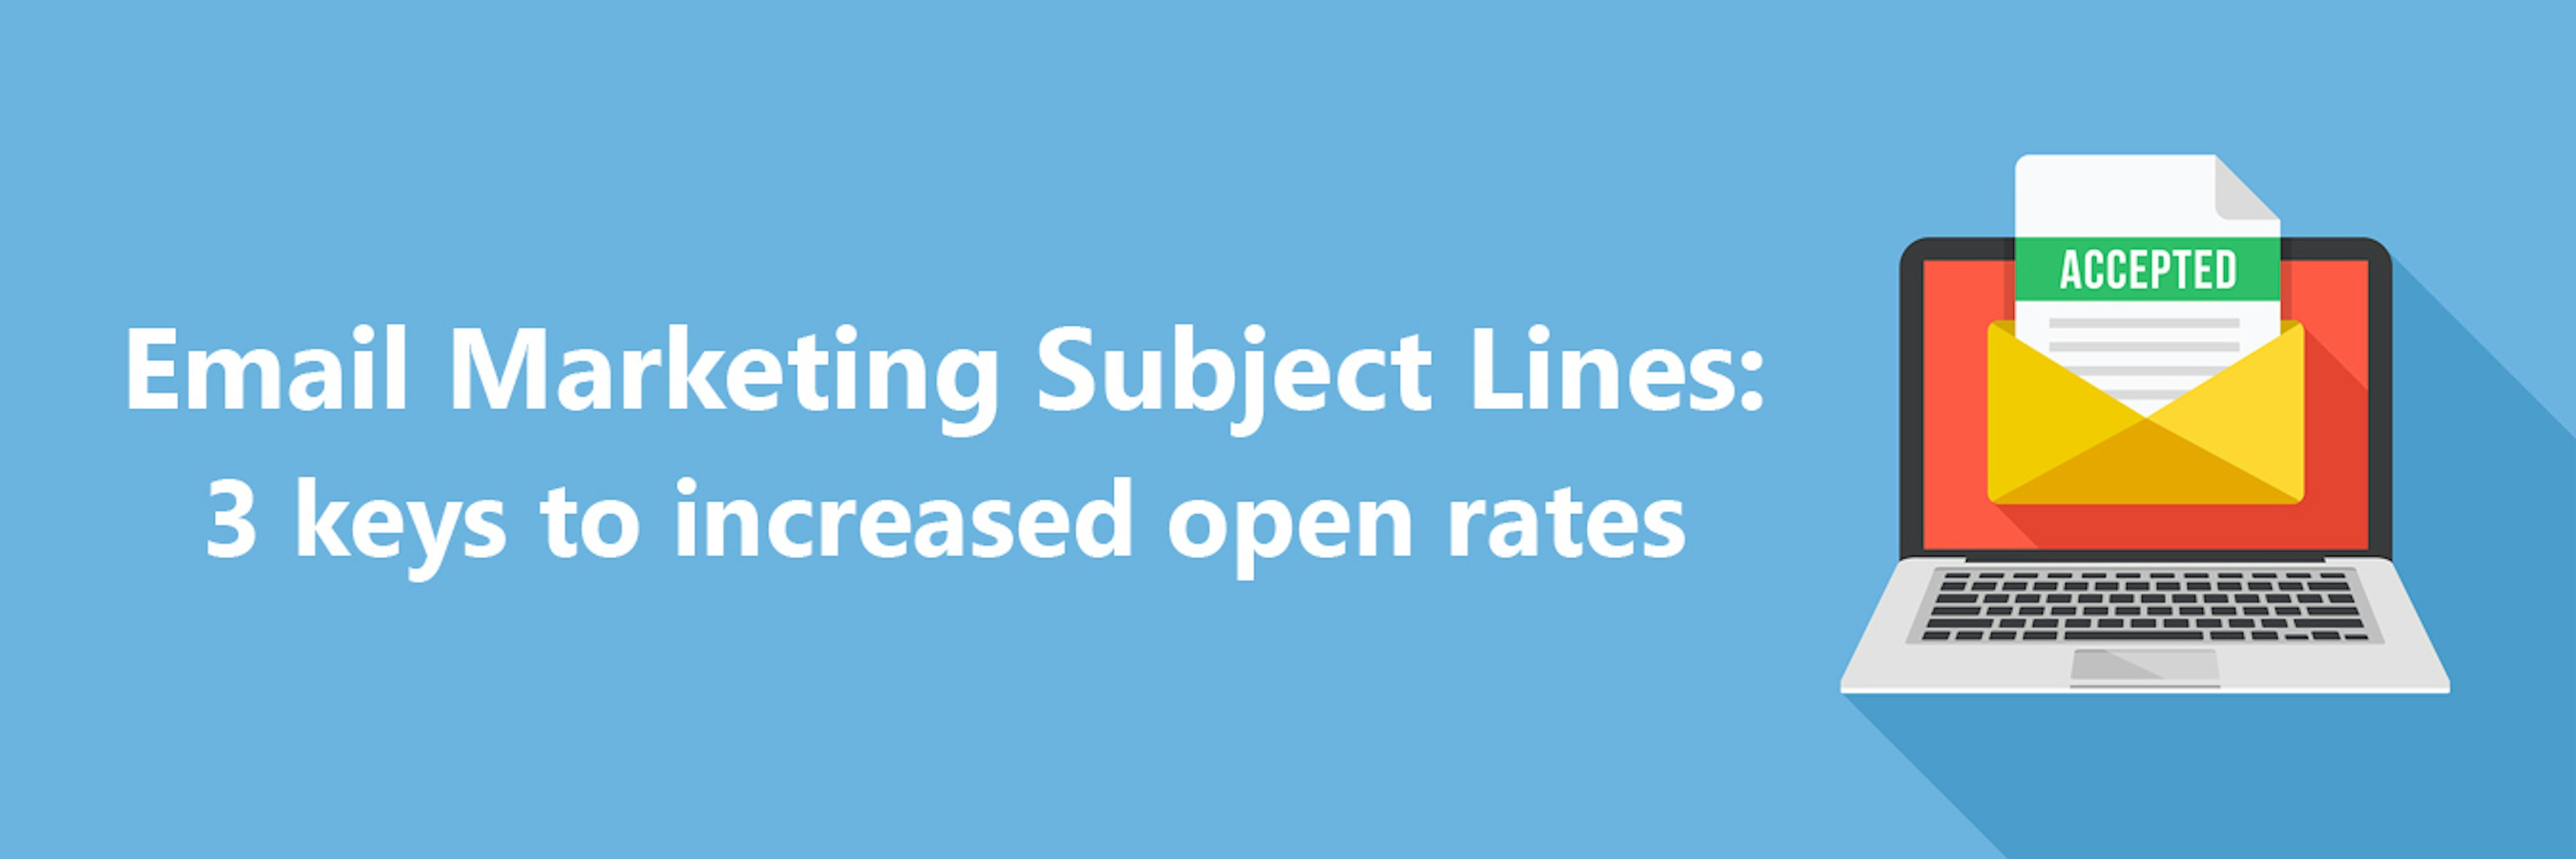 Email Marketing Subject Lines: 3 keys to increased open rates